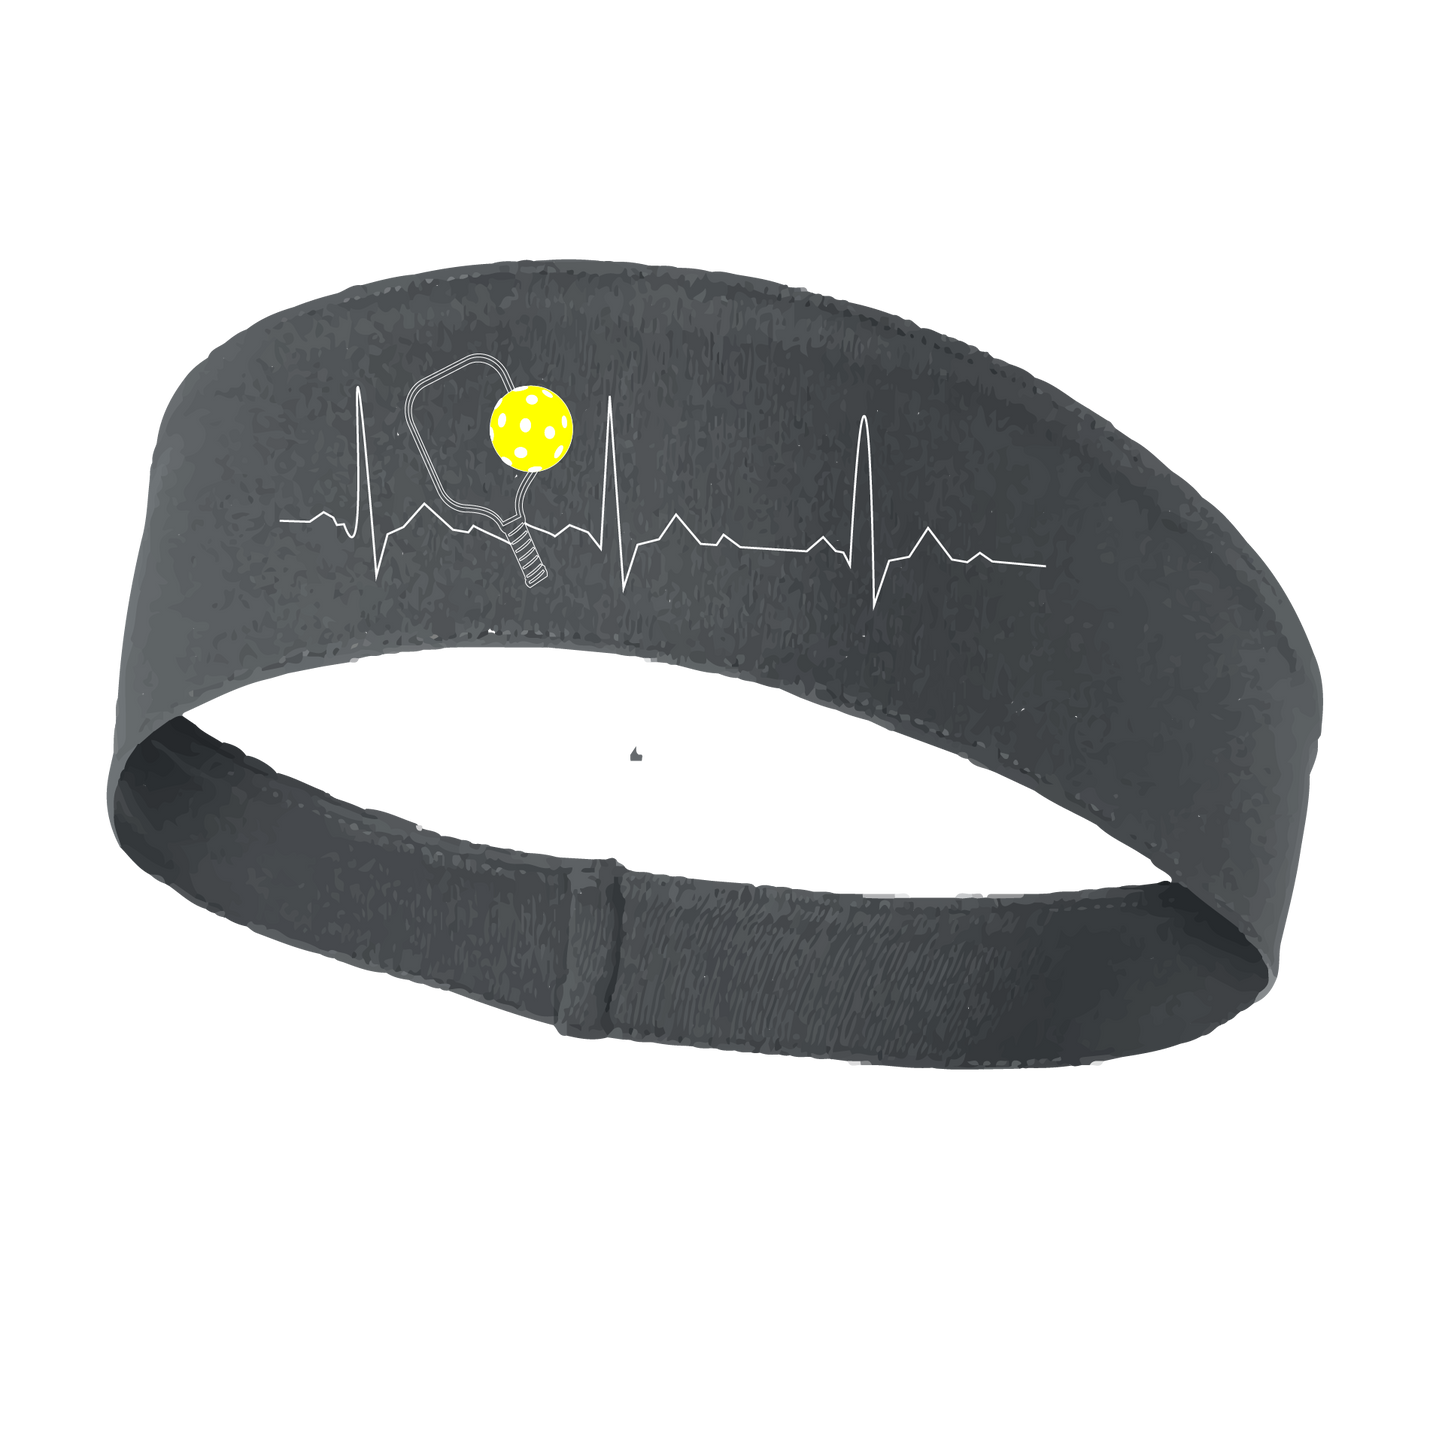 Pickleball Headband Design: Pickleball Heartbeat with white lettering and yellow ball  This fun, pickleball designed, moisture-wicking headband narrows in the back to fit more securely. Single-needle top-stitched edging. These headbands come in a variety of colors. Truly shows your love for the sport of pickleball!!